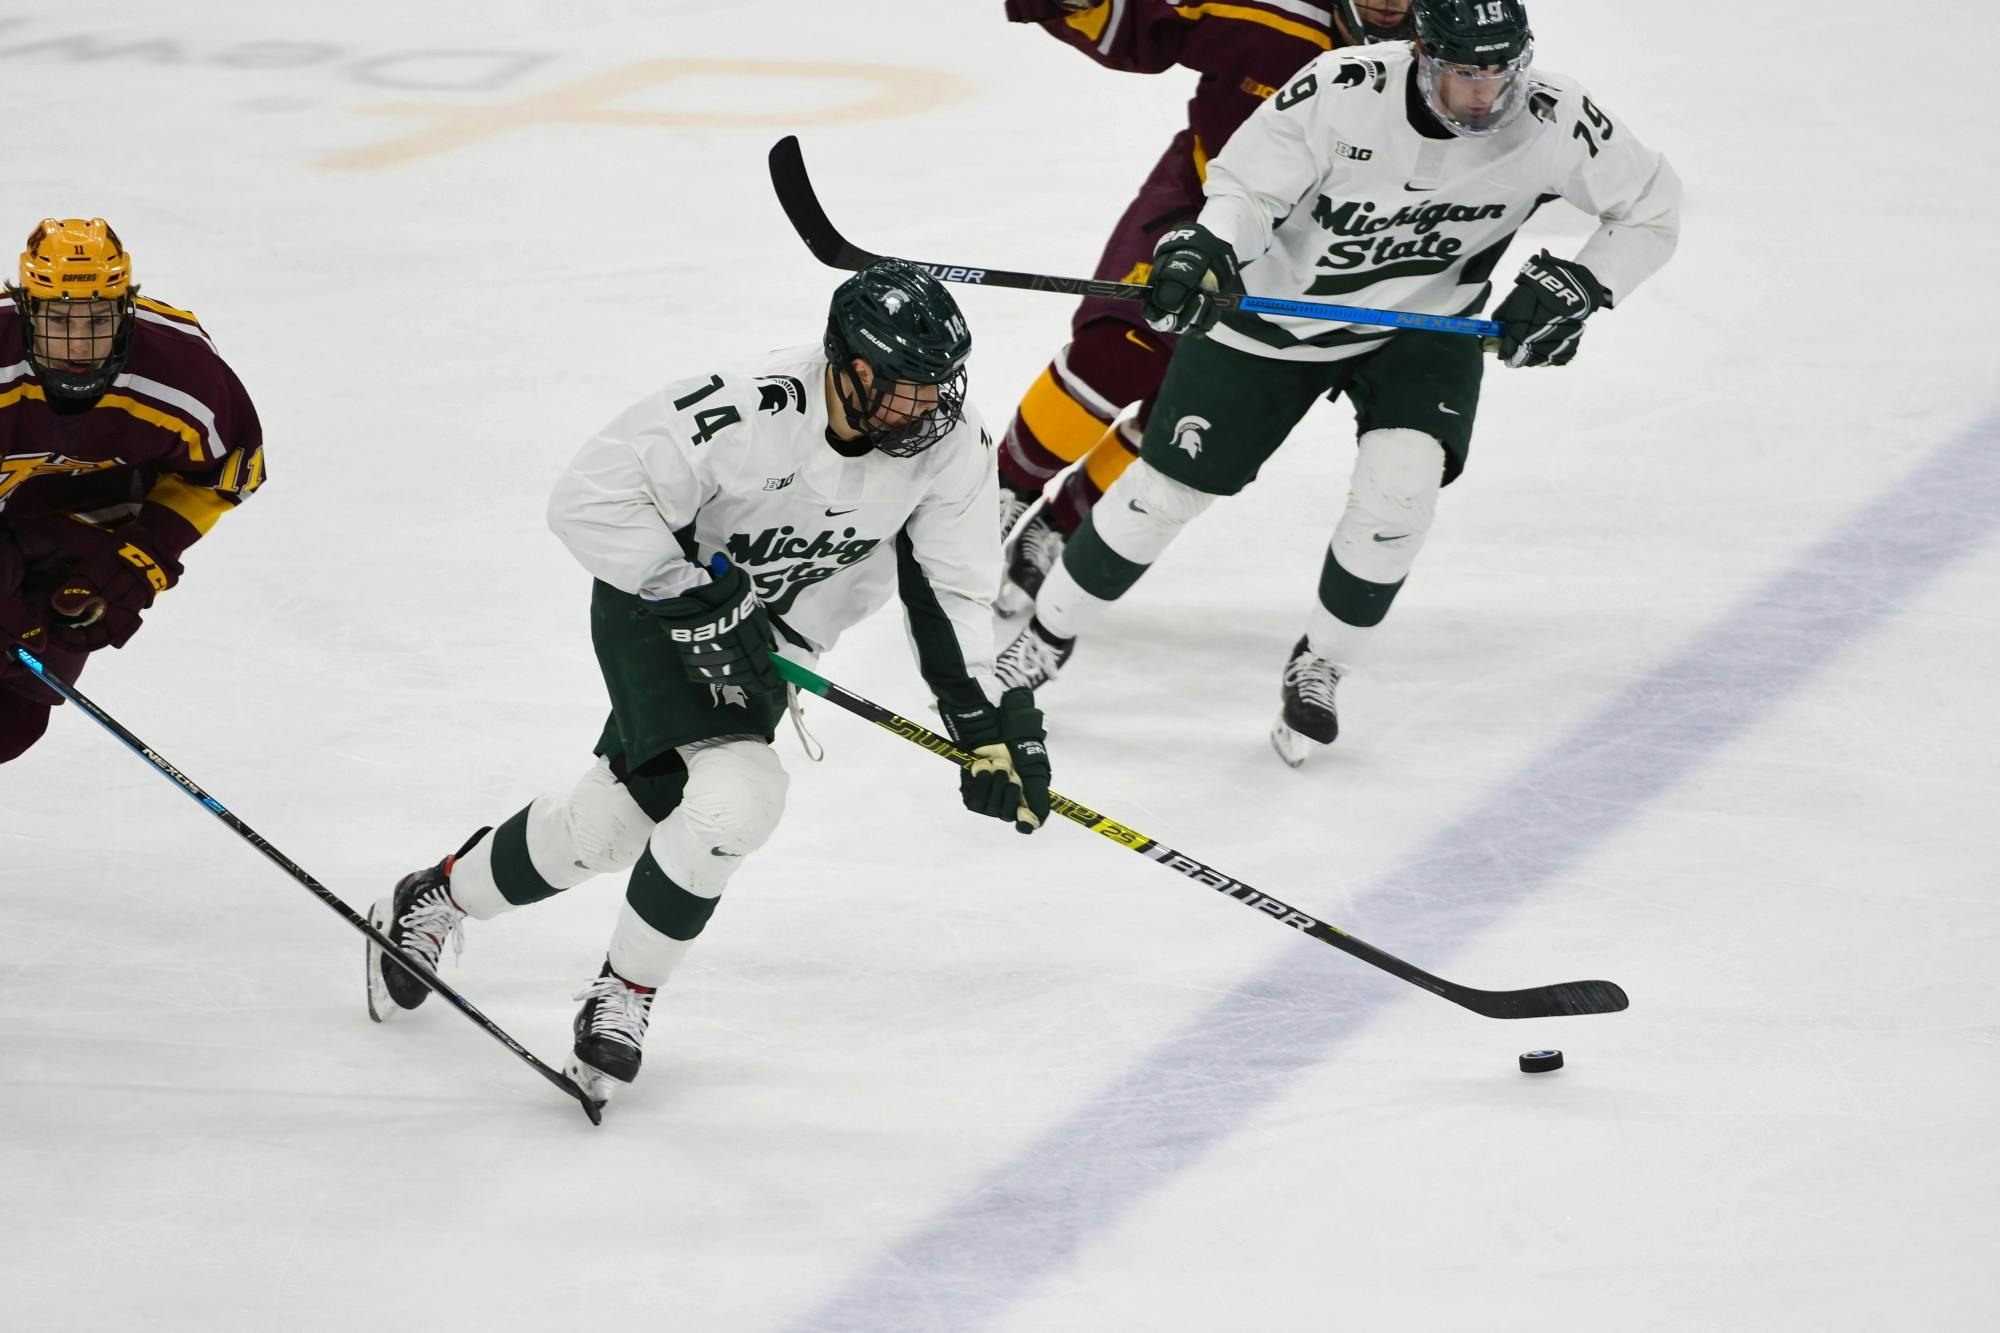 Sophomore forward Adam Goodsir (14) receives a pass during the hockey game against Minnesota at the Munn Ice Arena on January 10, 2020. The Spartans defeated the Golden Gophers 4-1. 